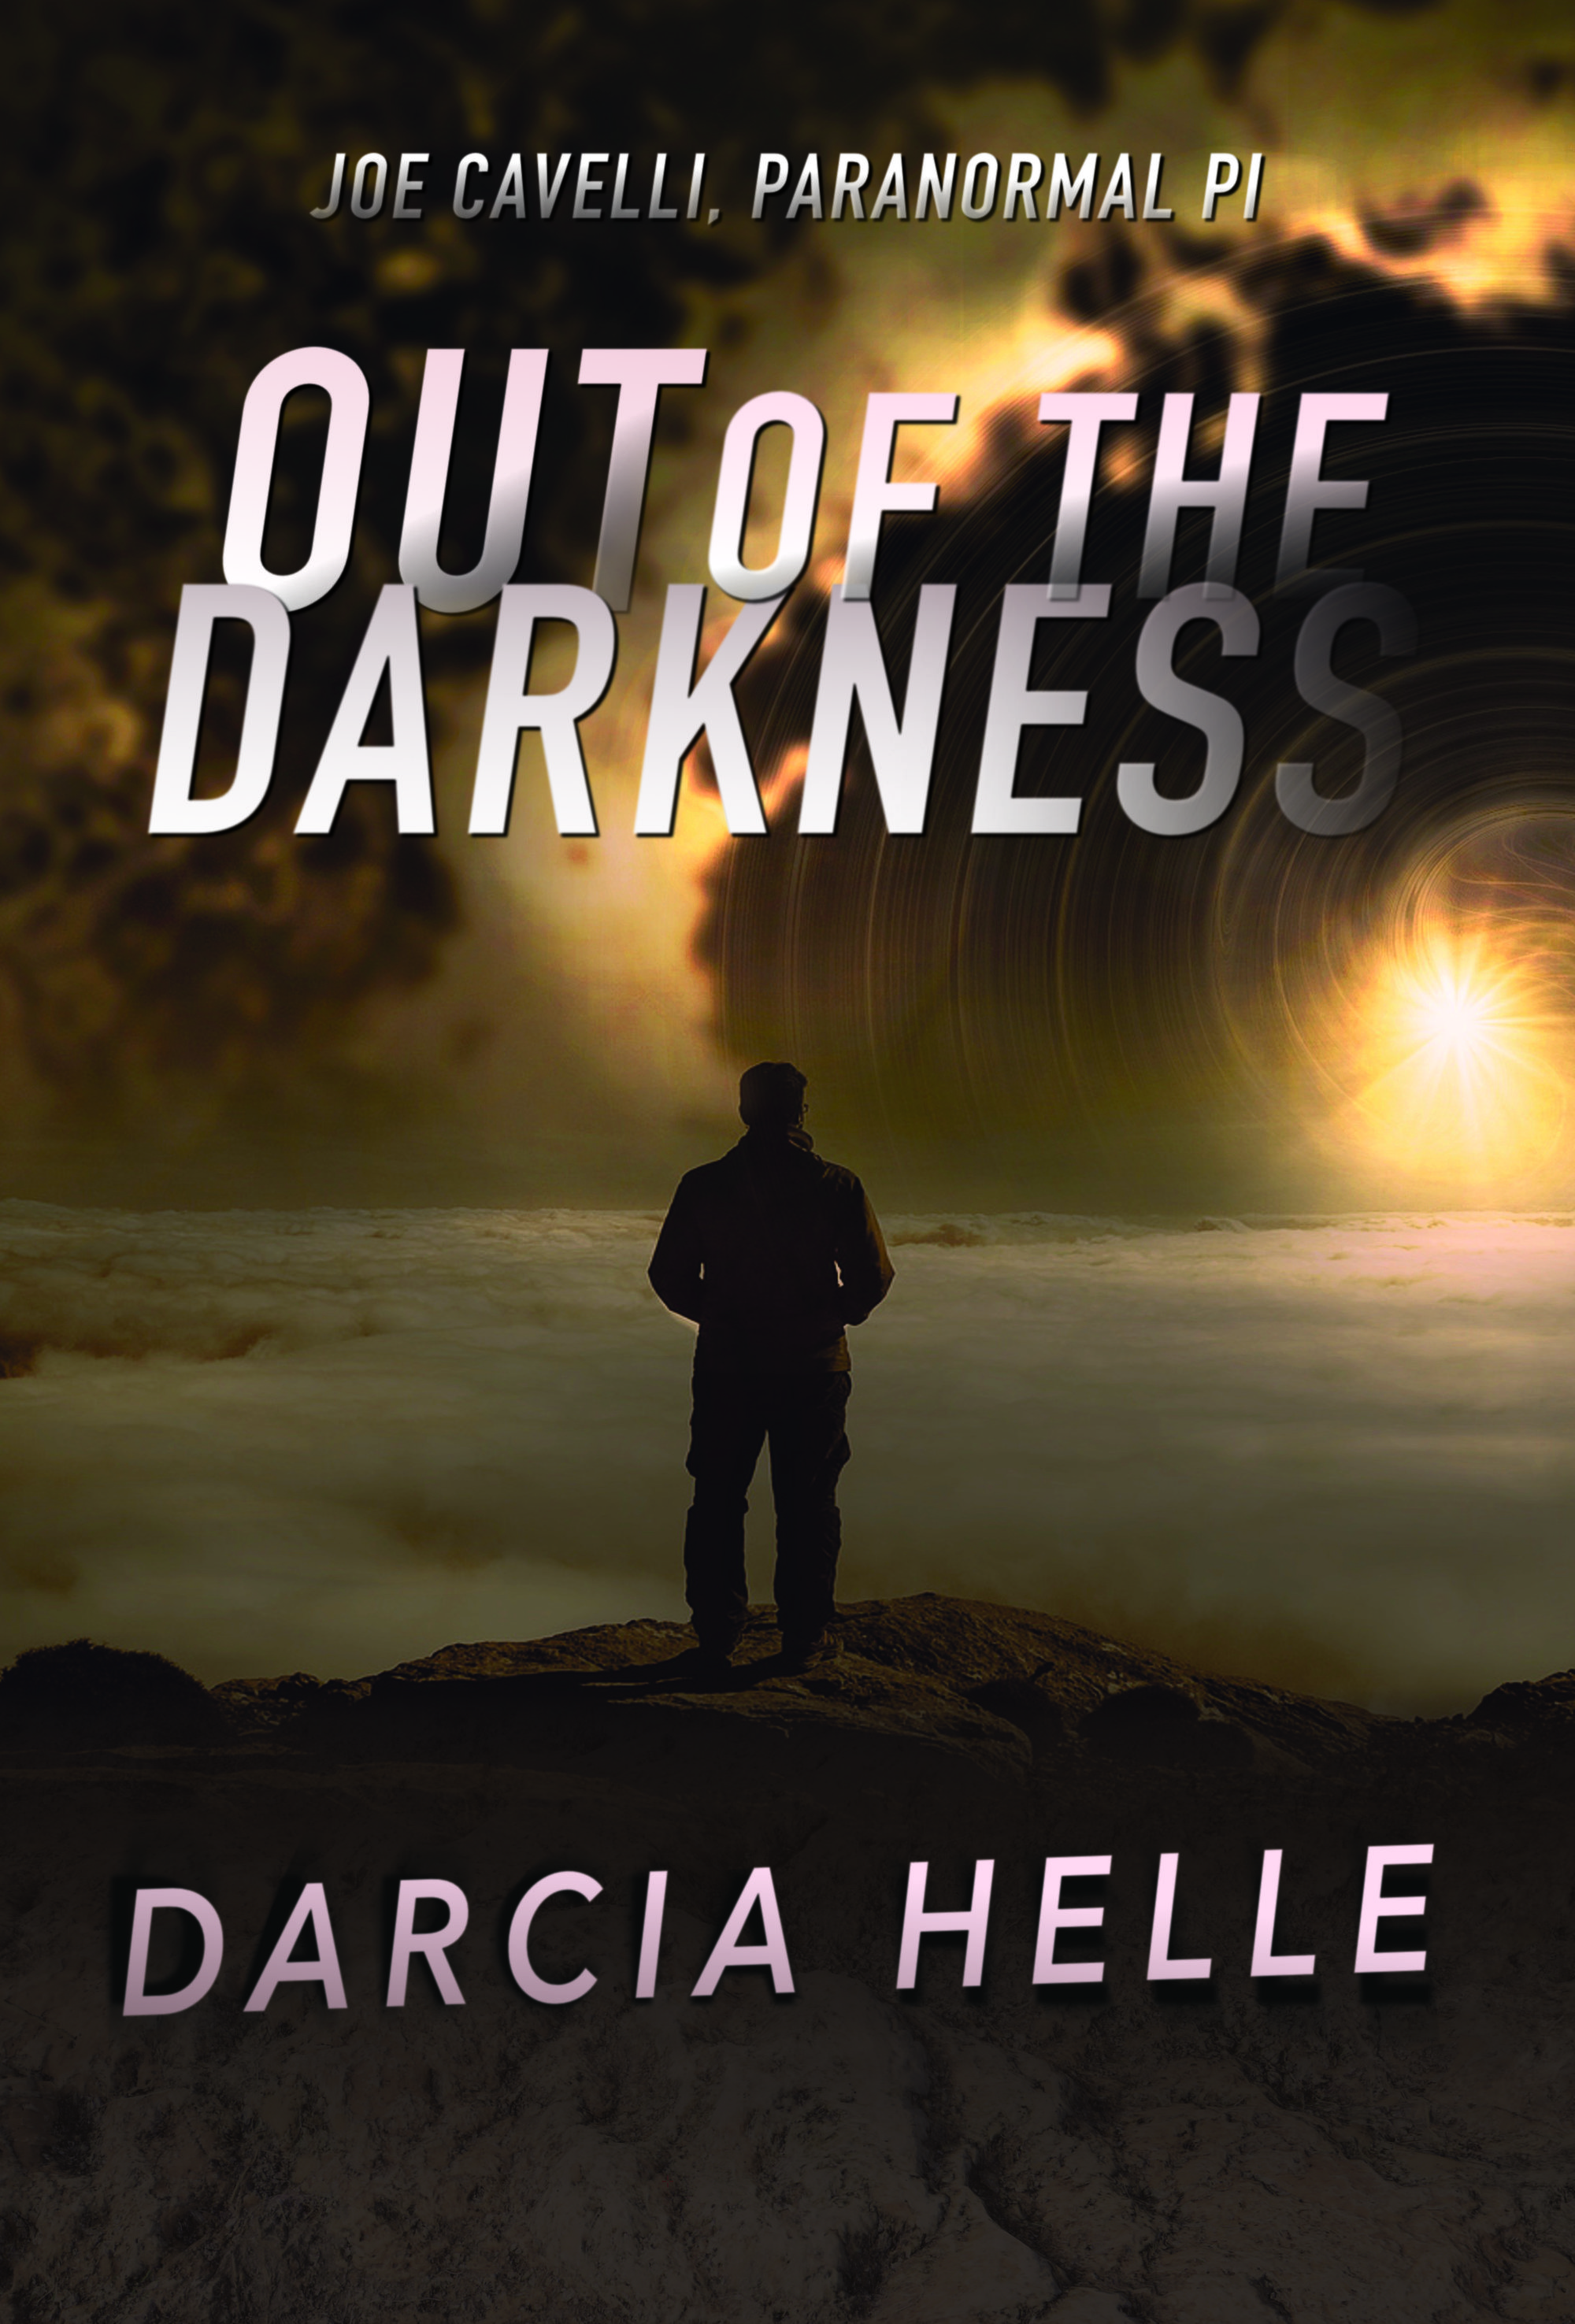 Out of the Darkness by Darcia Helle